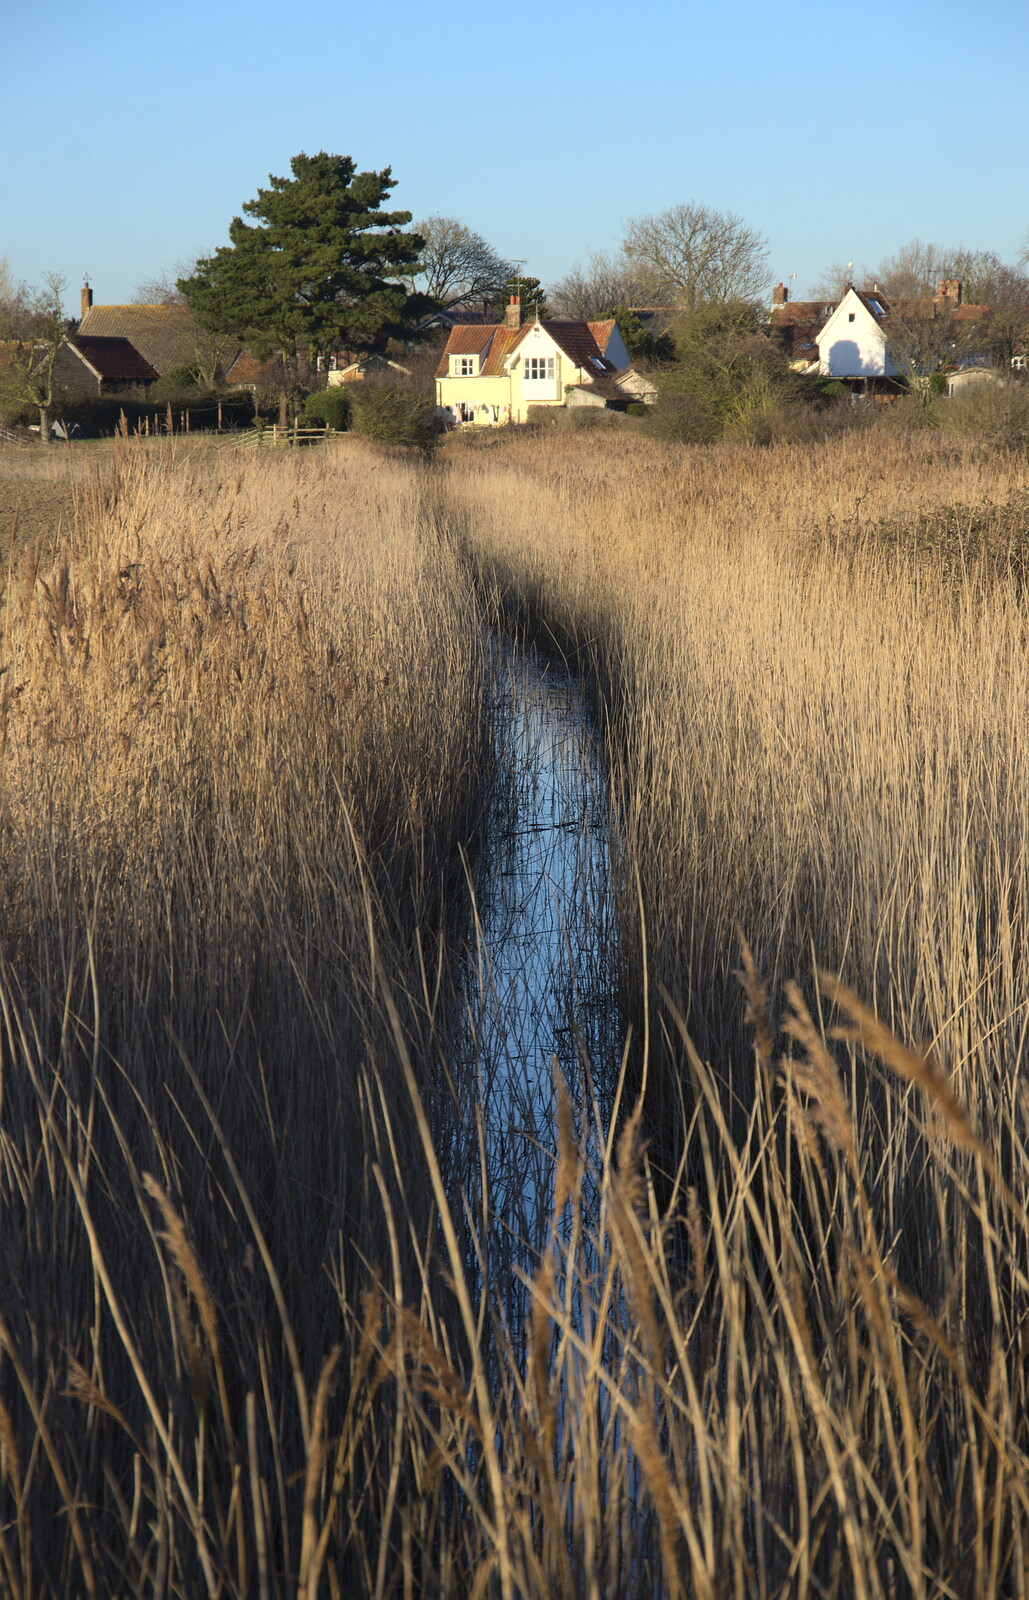 In the marsh reeds from An Orford Day Out, Orford, Suffolk - 17th February 2018